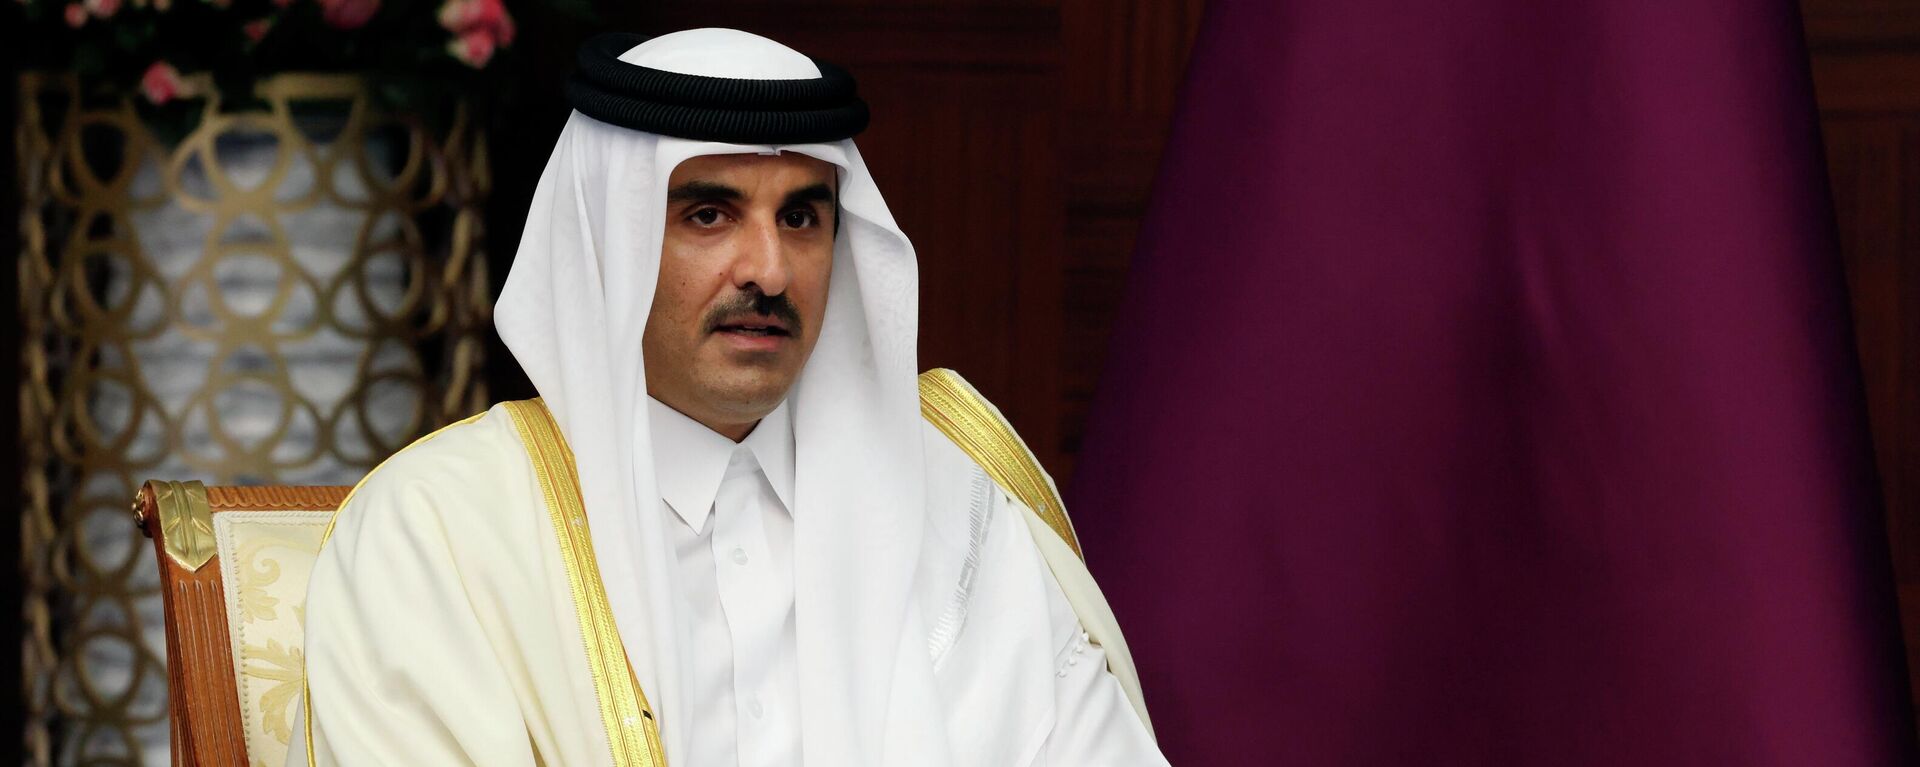 The Emir of Qatar, Sheikh Tamim bin Hamad Al Thani listens to Russian President Vladimir Putin during their meeting on the sidelines of the Conference on Interaction and Confidence Building Measures in Asia (CICA) summit, in Astana, Kazakhstan, Thursday, Oct. 13, 2022. - Sputnik International, 1920, 25.10.2022